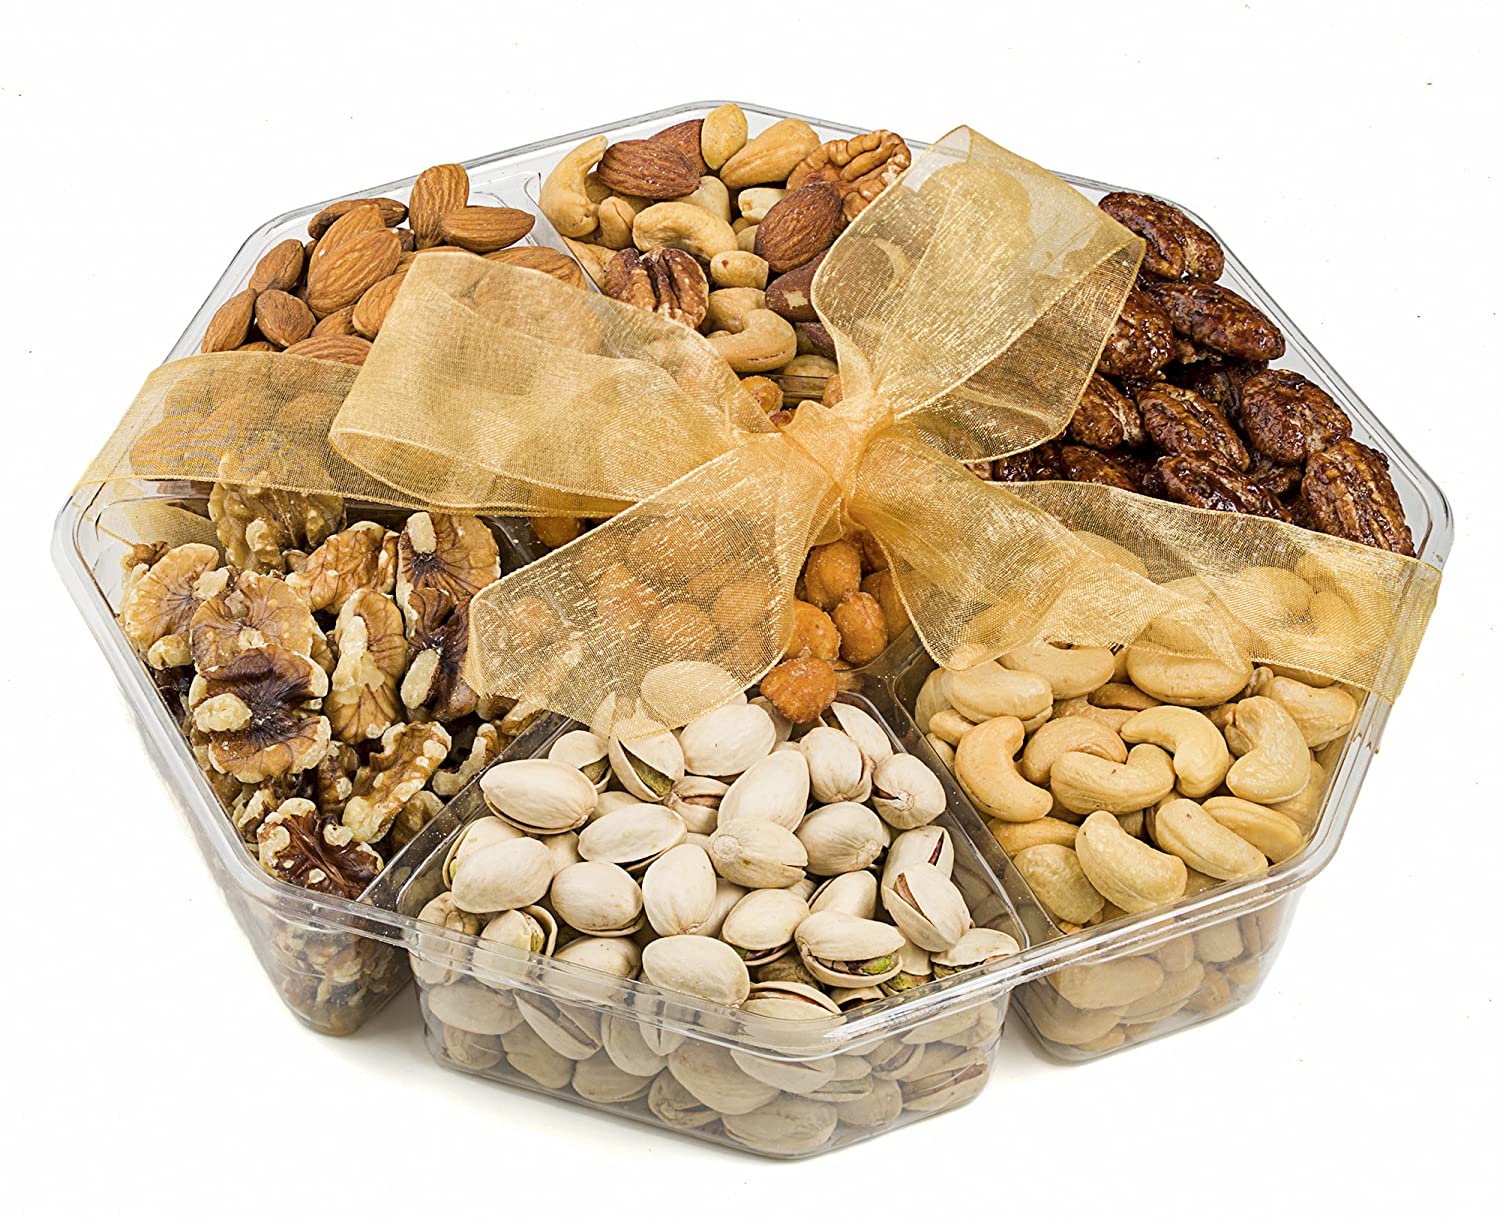  Honey Roasted Peanuts, Cashews, & Almond Mix - 1 LB Container  : Grocery & Gourmet Food